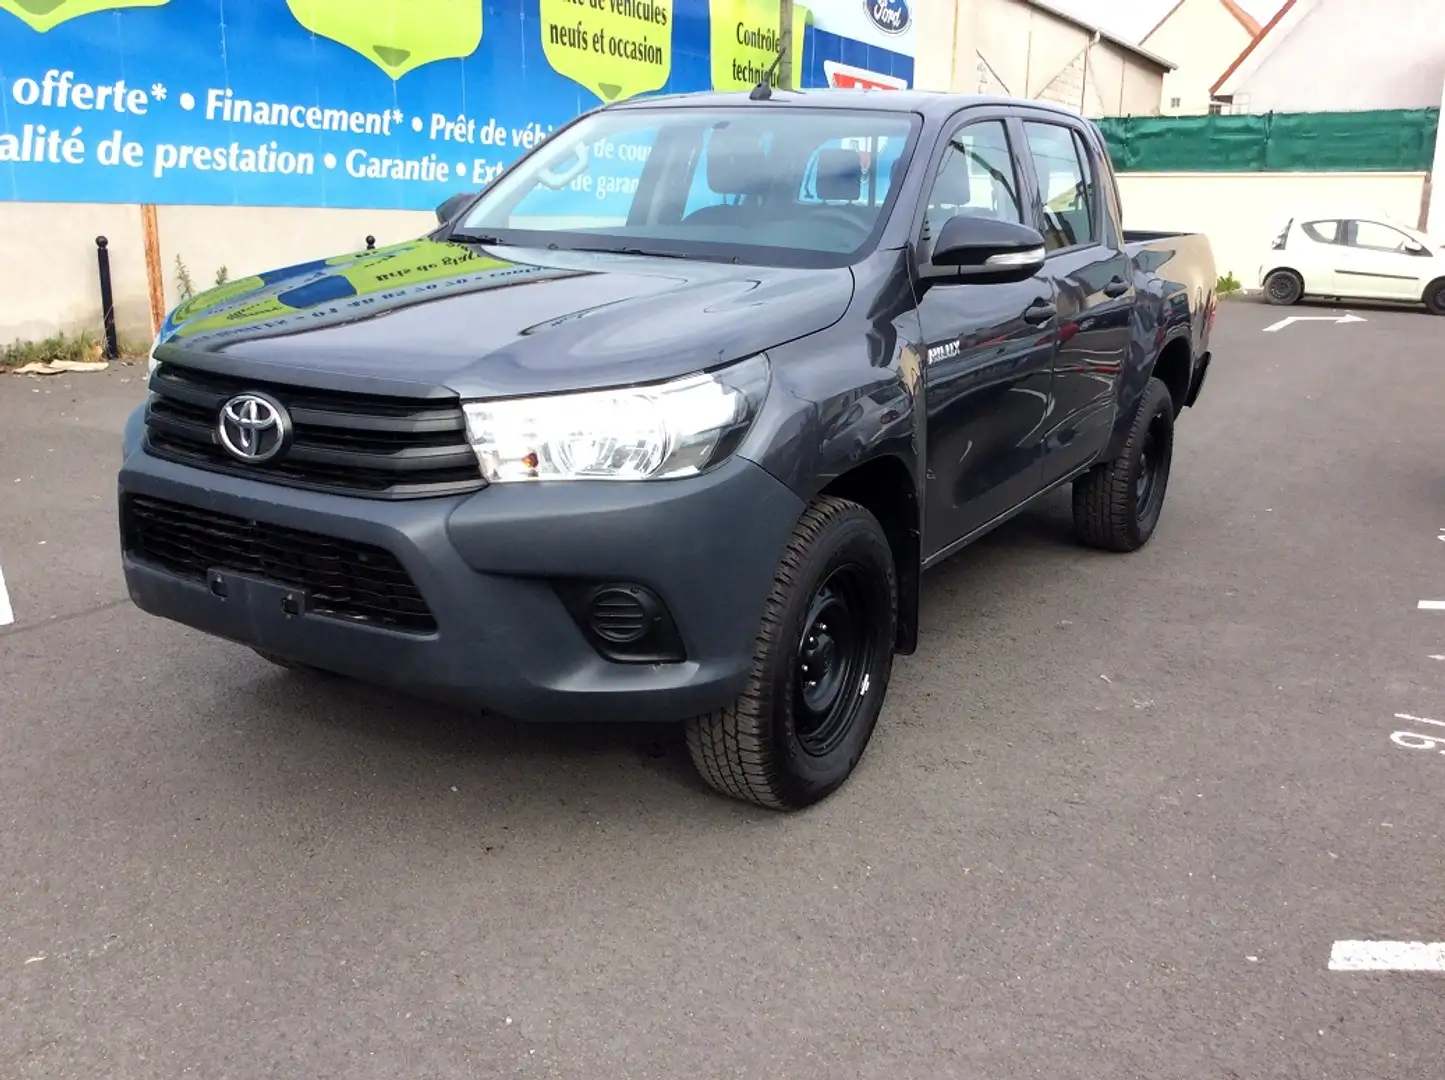 Toyota Hilux IV 4WD 2.4 D-4D 150 DOUBLE CABINE - 2